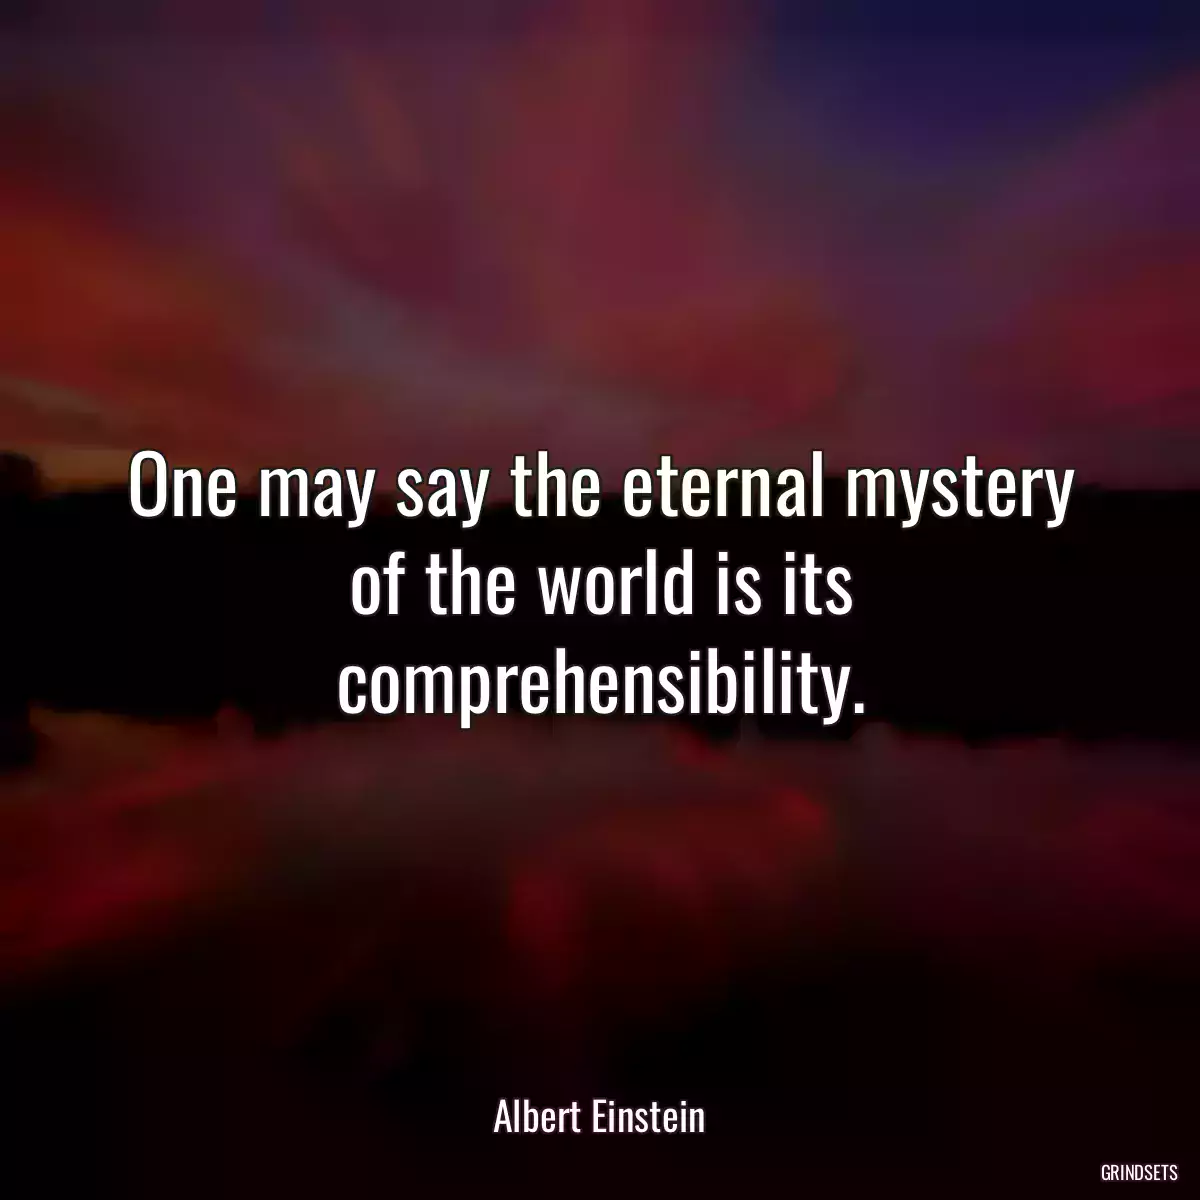 One may say the eternal mystery of the world is its comprehensibility.